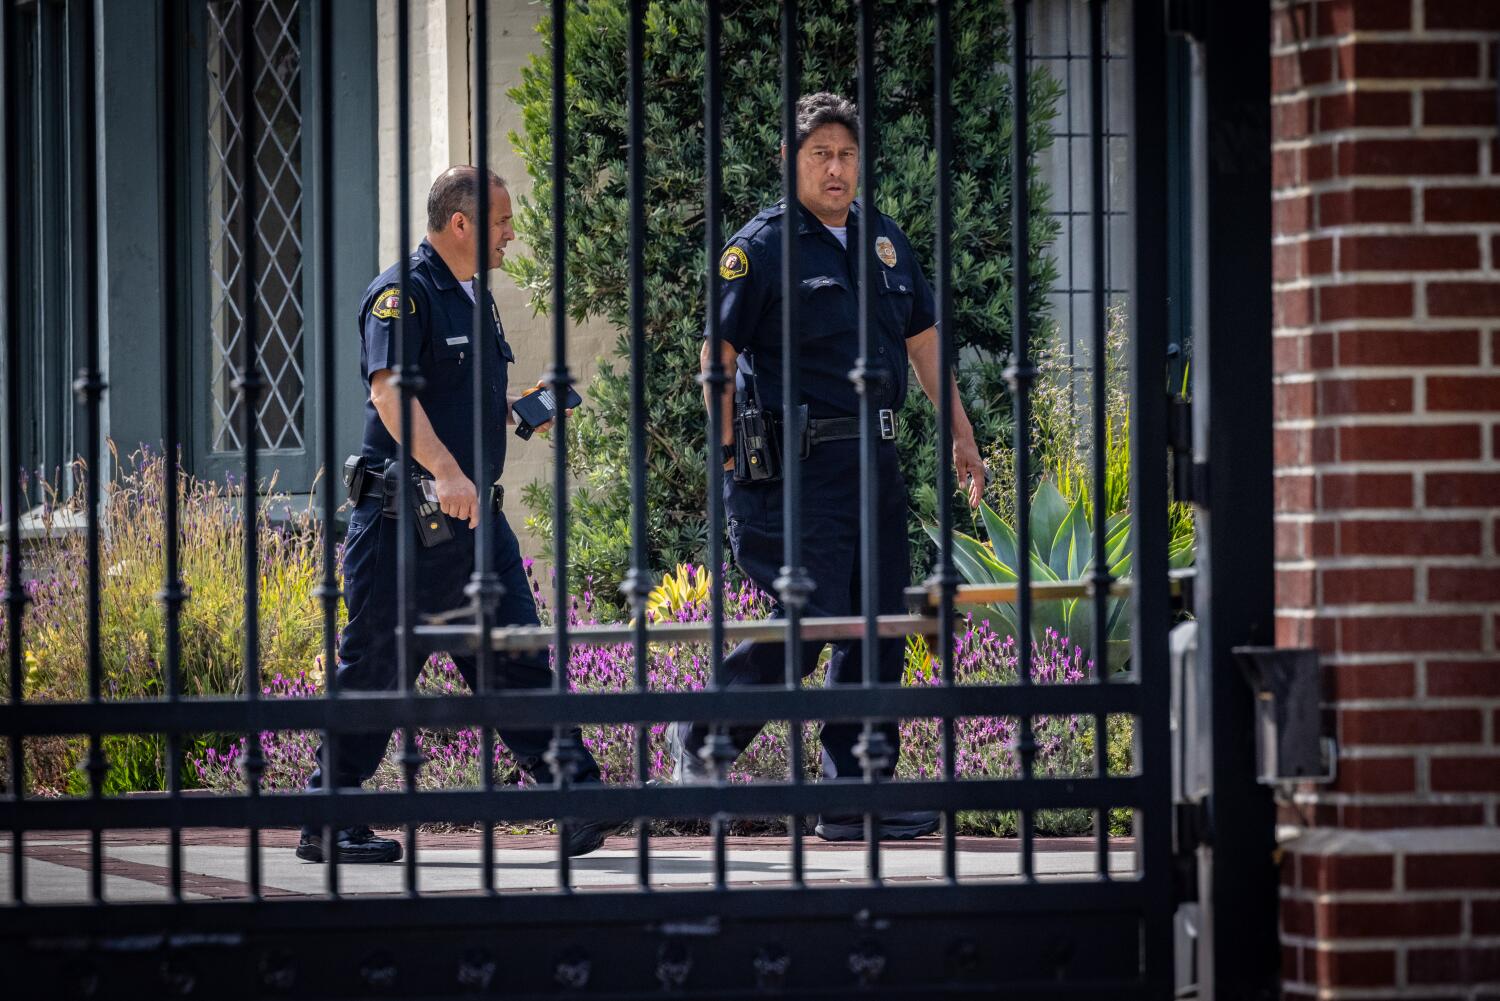 An intruder made it to the second floor of L.A. Mayor Bass' home: Here's what we know